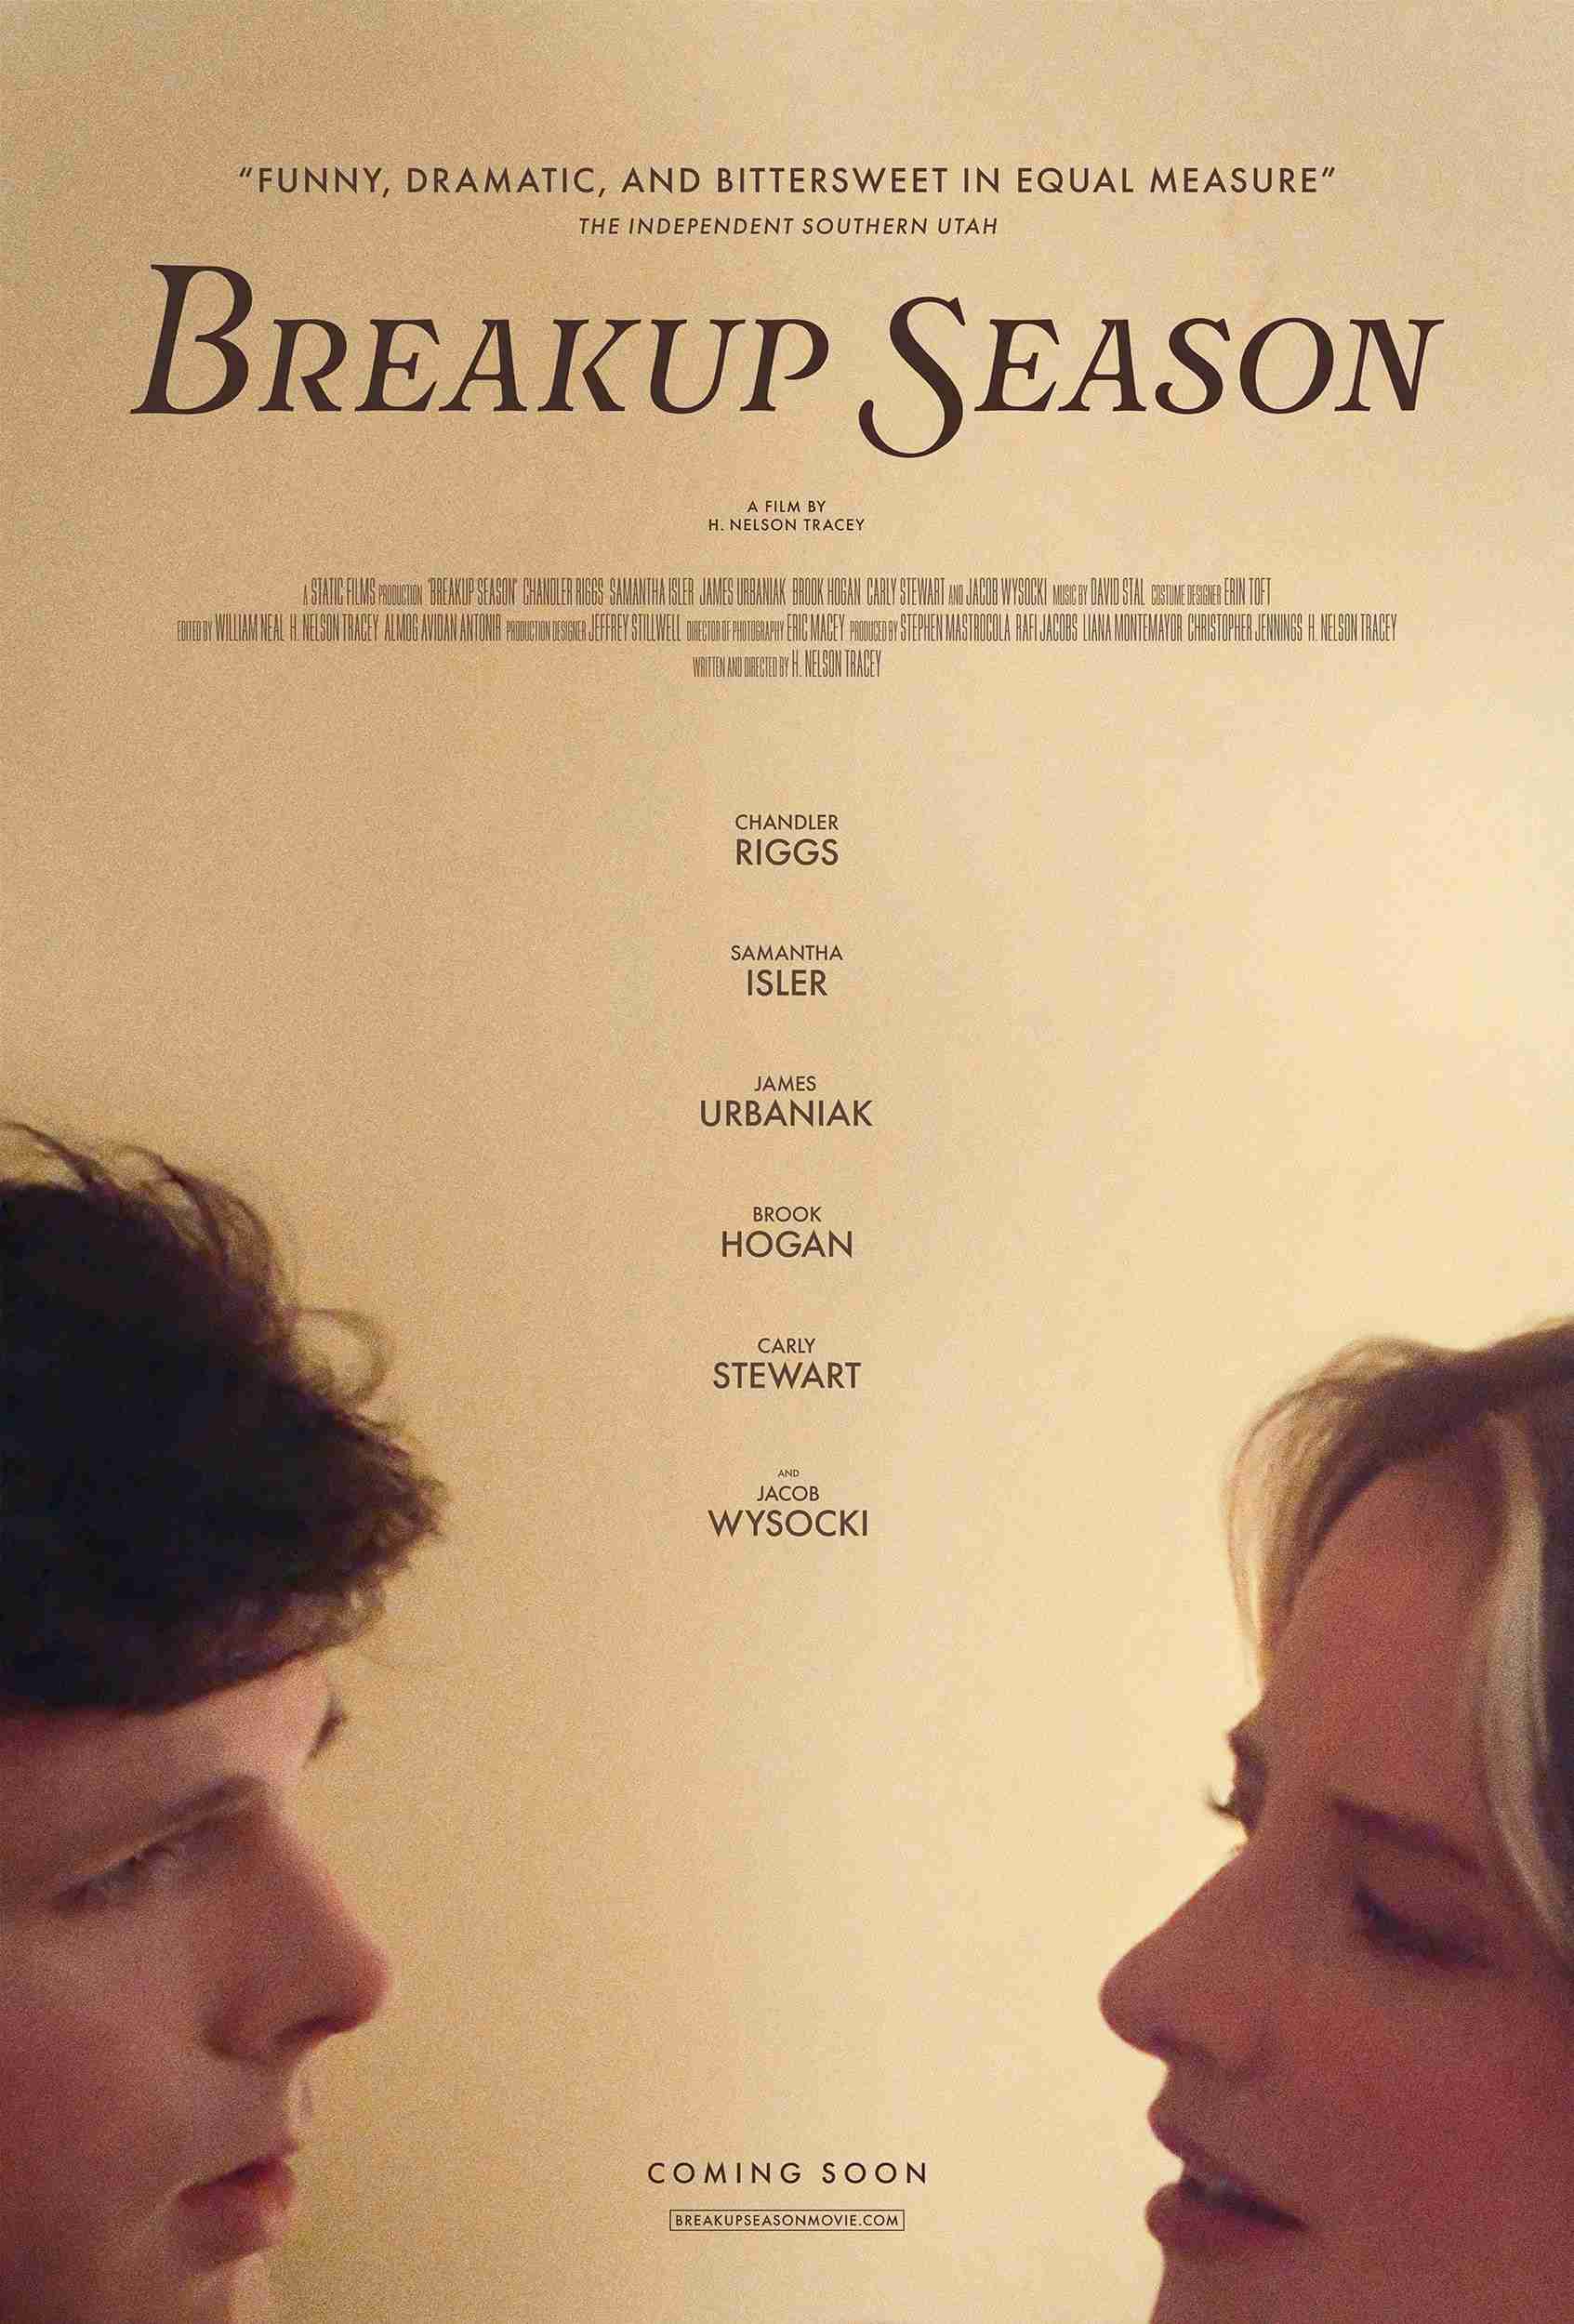 Official Poster for "Breakup Season" indie starring Chandler Riggs and Samantha Isler